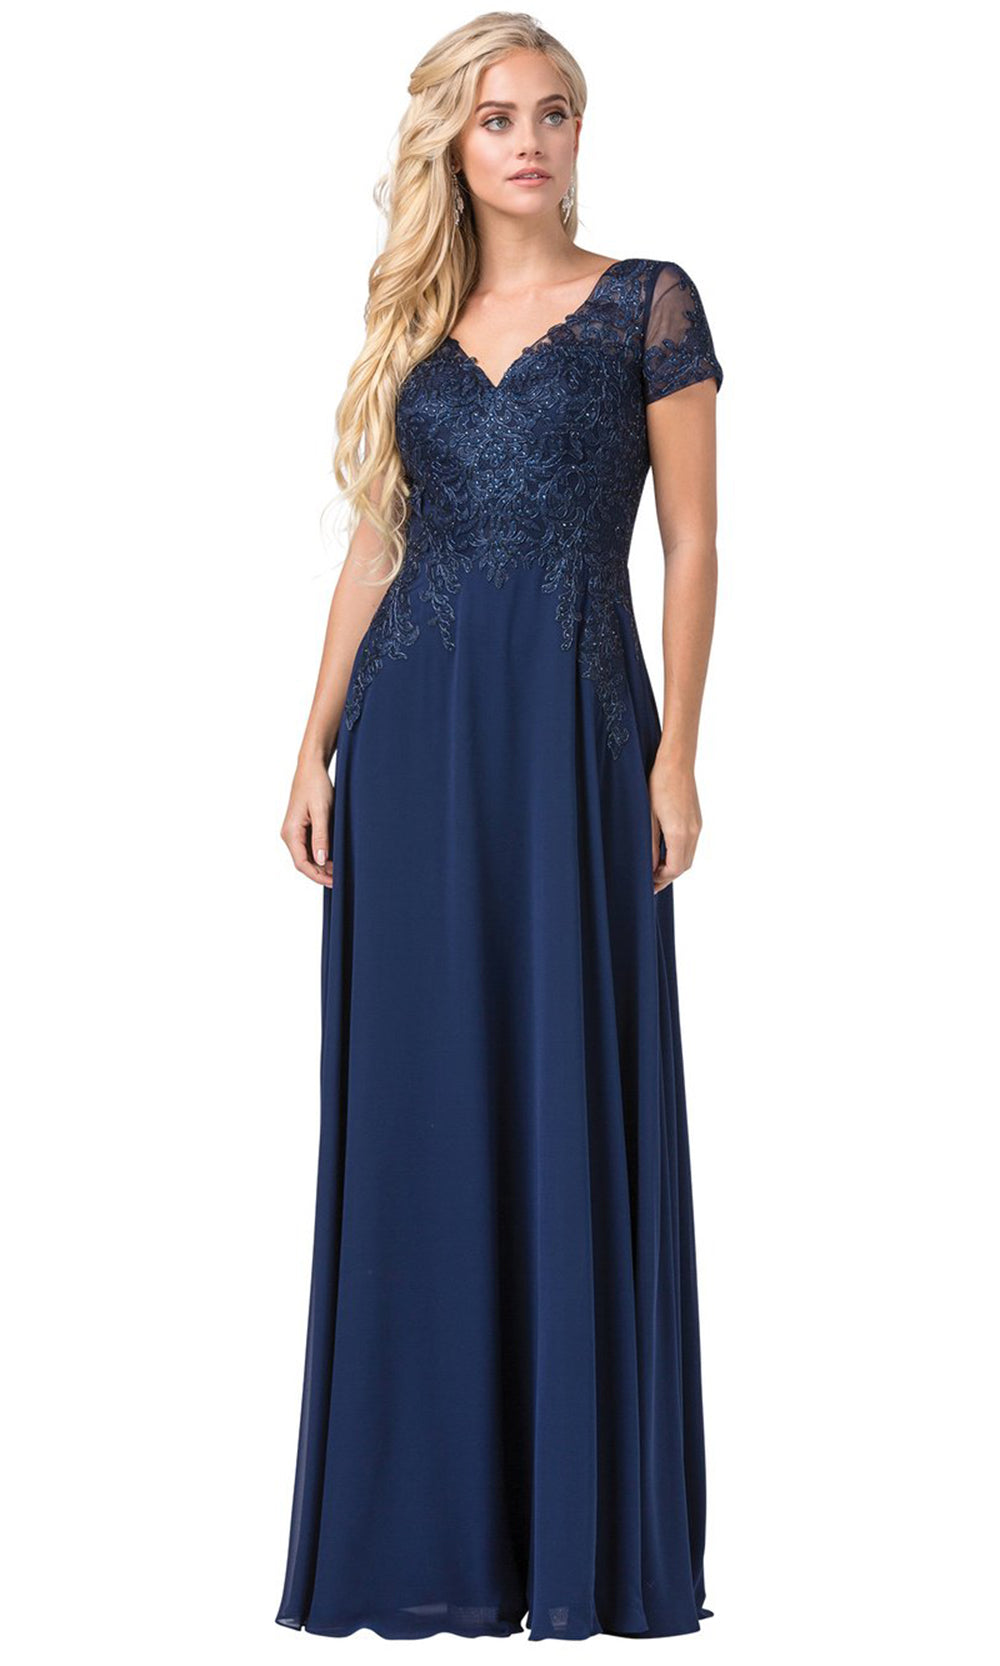 Dancing Queen - 2757 Sheer Short Sleeve Embroidered A-Line Dress In Blue